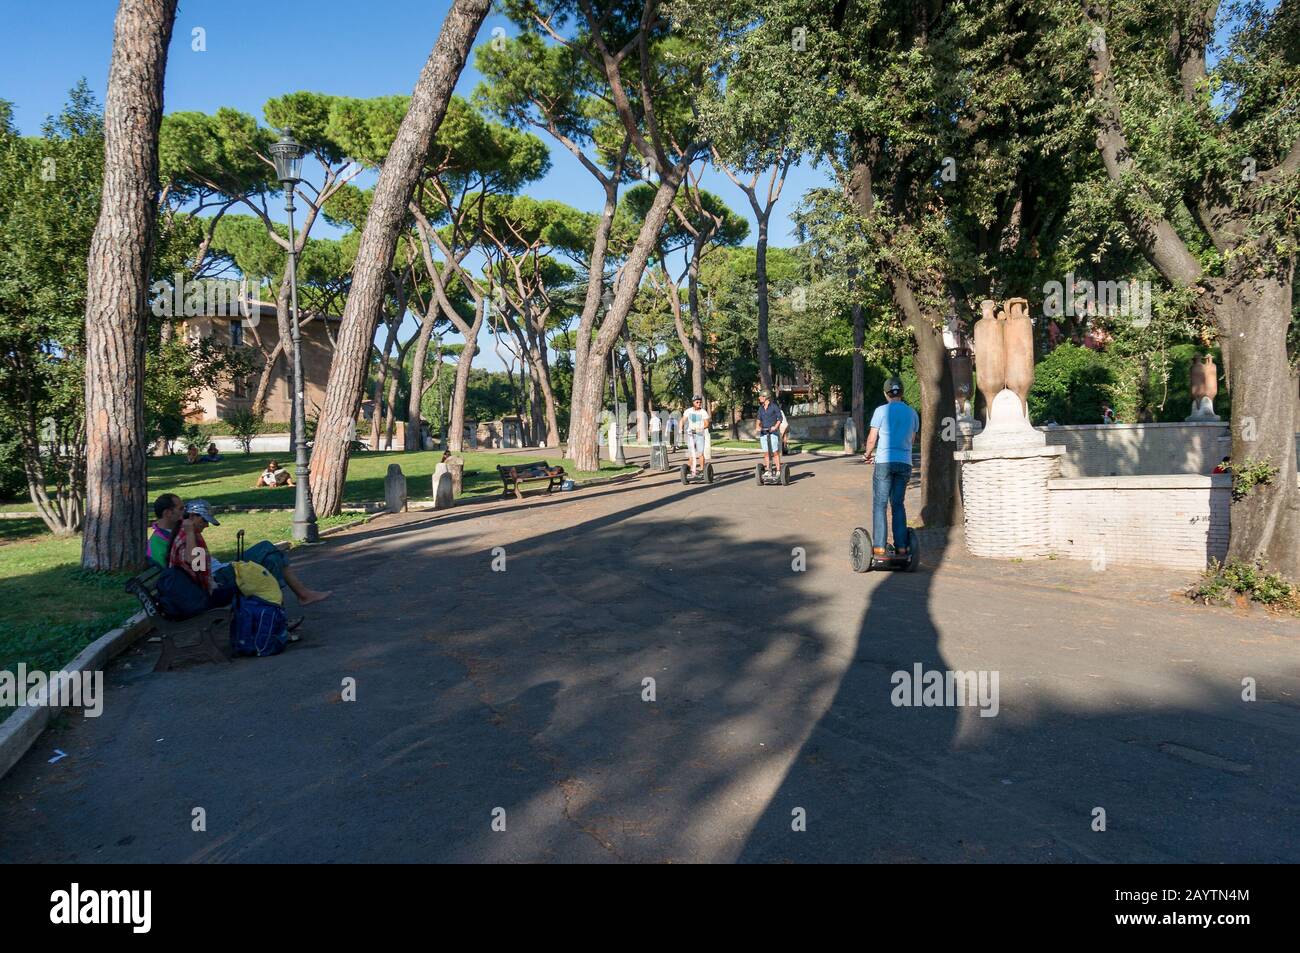 Rome, Italy - September 21, 2013: People on gyro scooters, segways in Parco del Colle Oppio public park in Rome Stock Photo